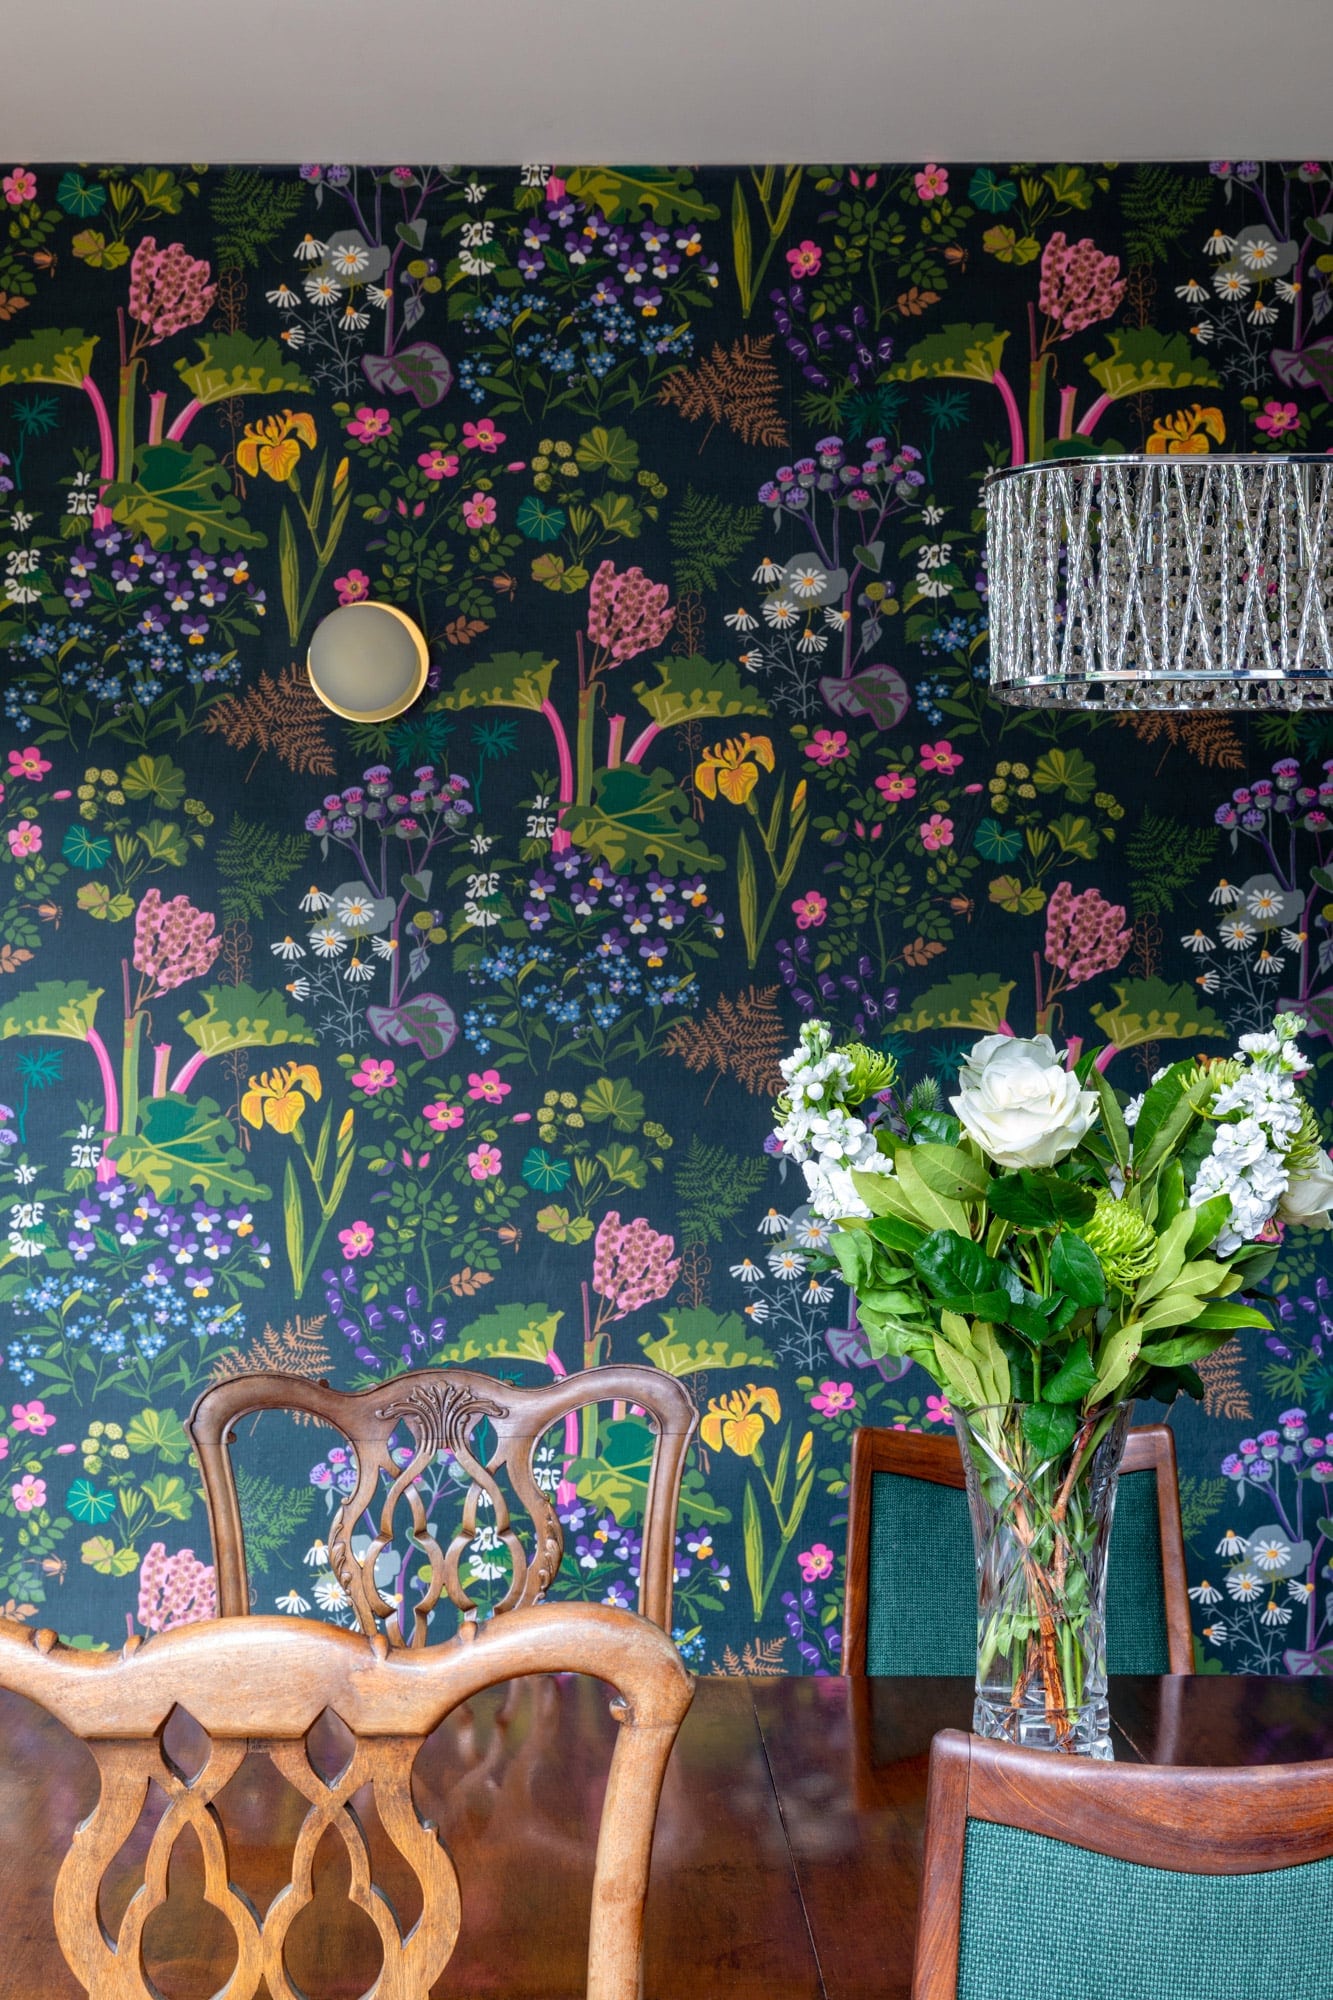 Interior detail shot of a dining table with vibrant wallpaper on the background